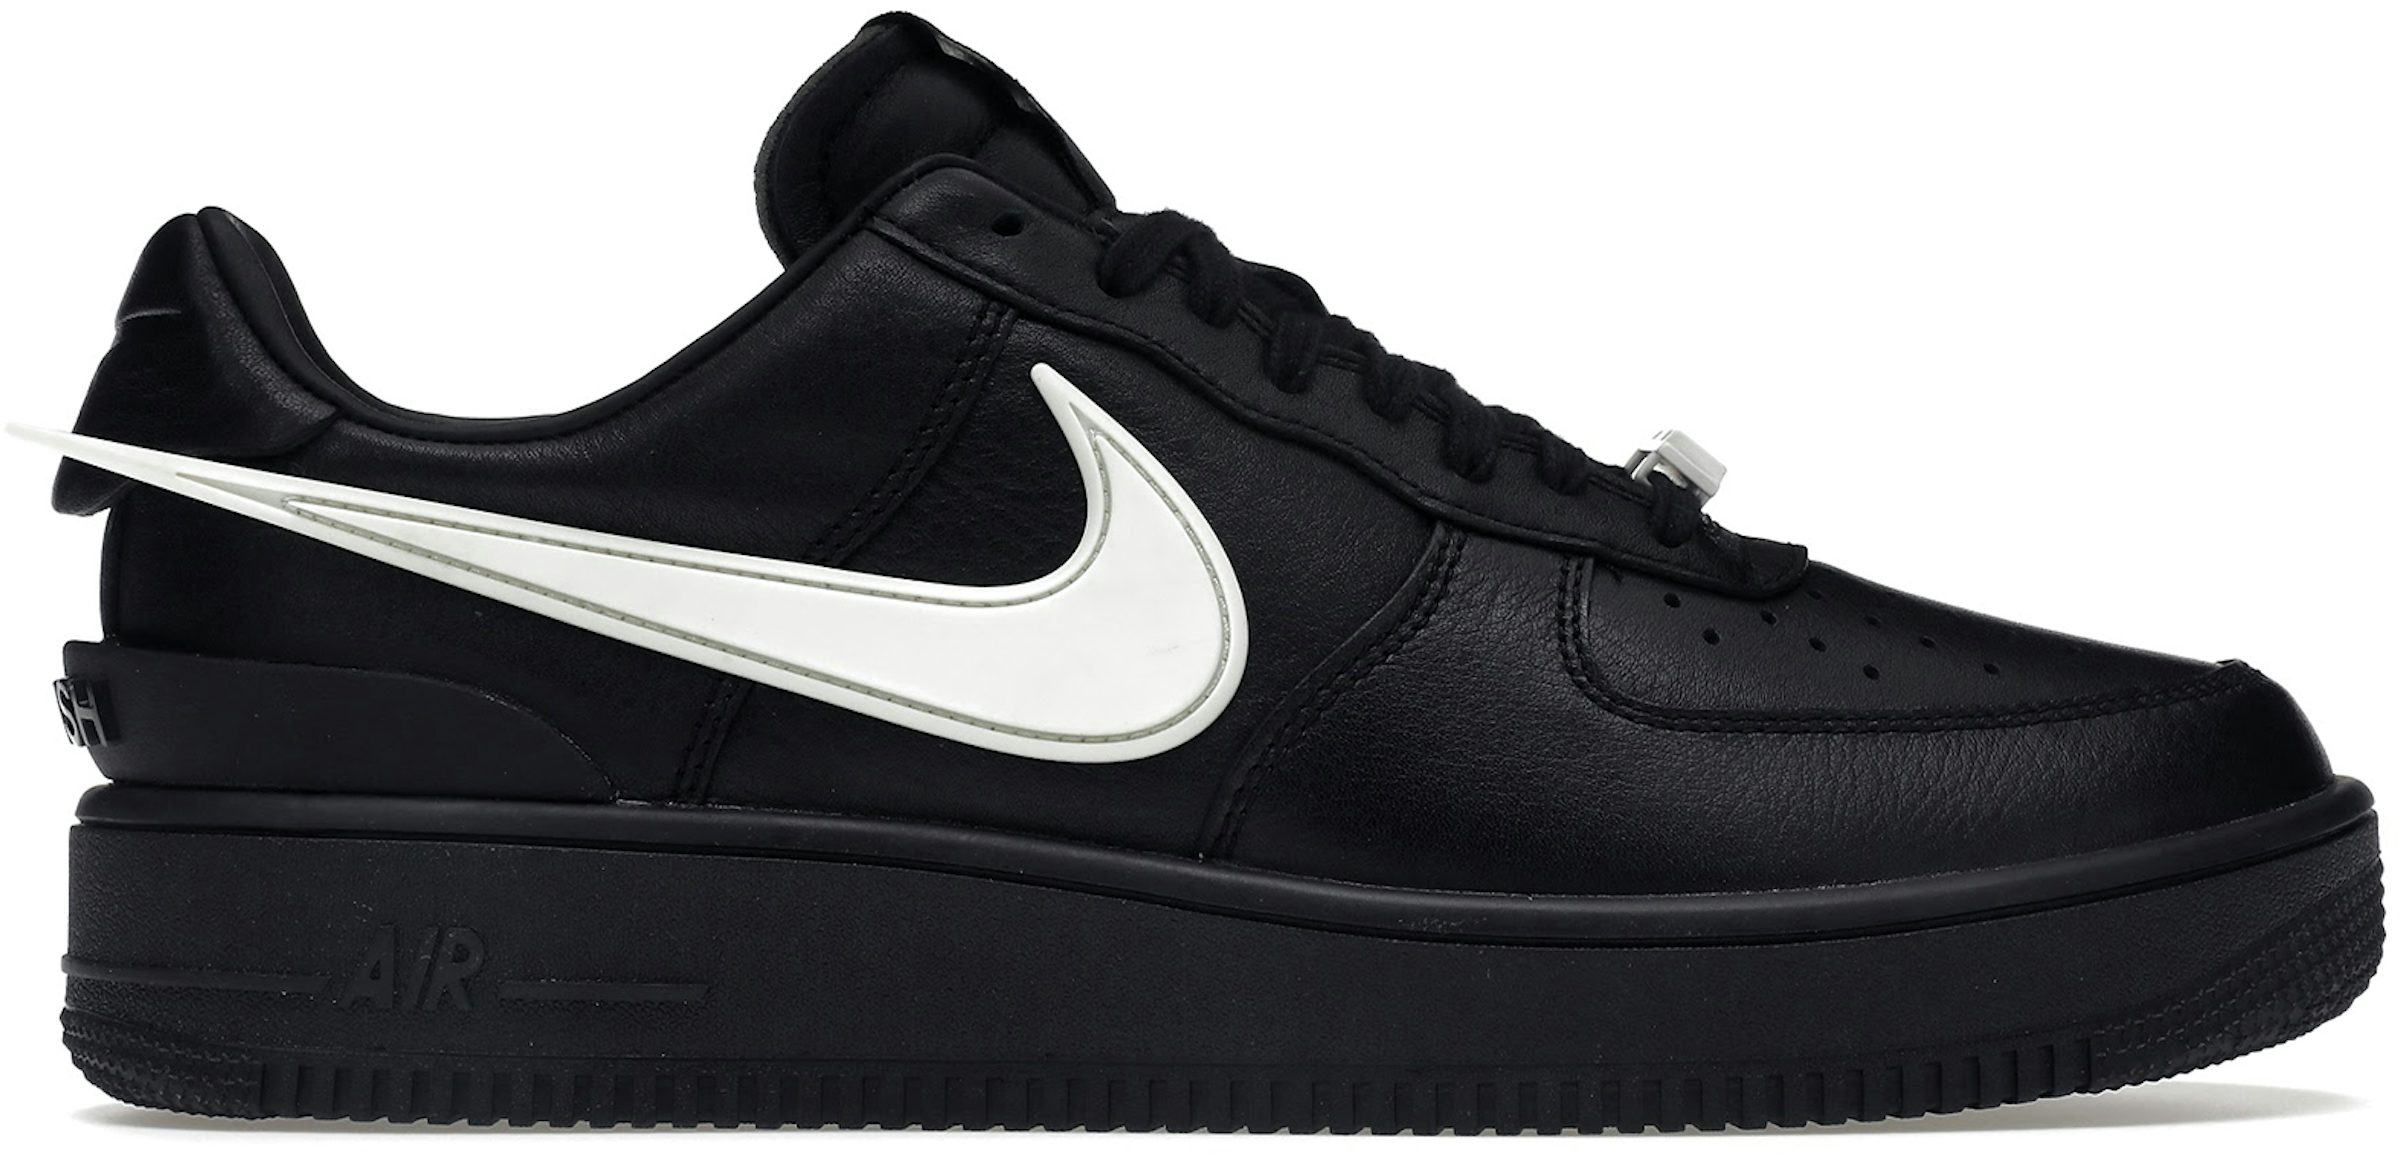 Rare - Nike Air Force 1 Black 'Overbranding' 07 lv8 Size 12.5